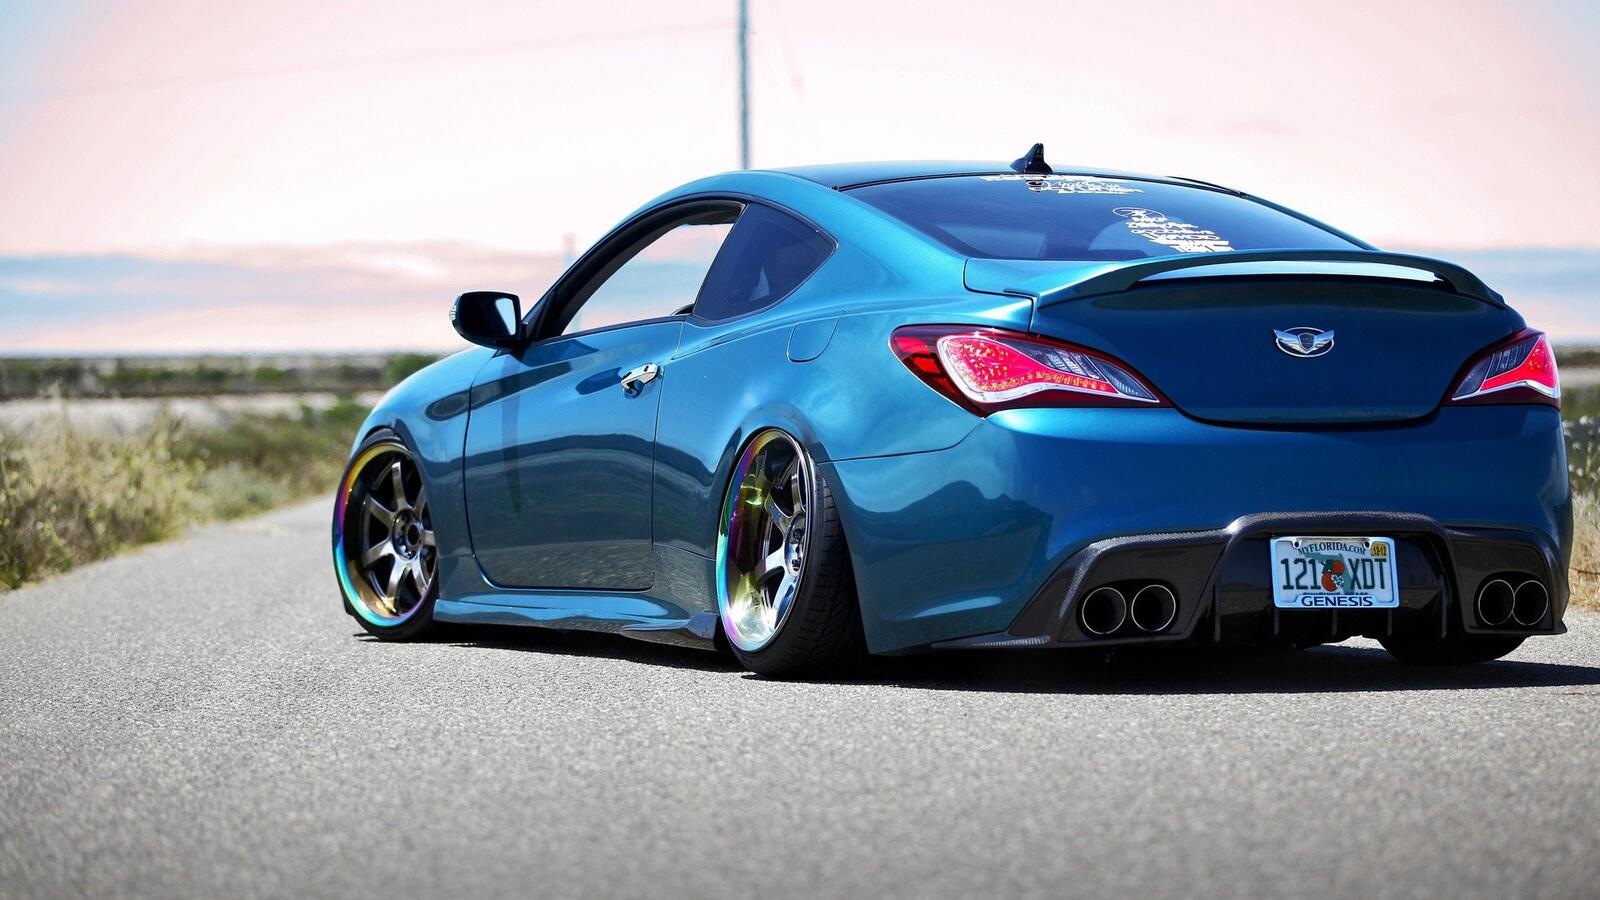 Free photo Blue hyundai genesis coupe on stance rear view